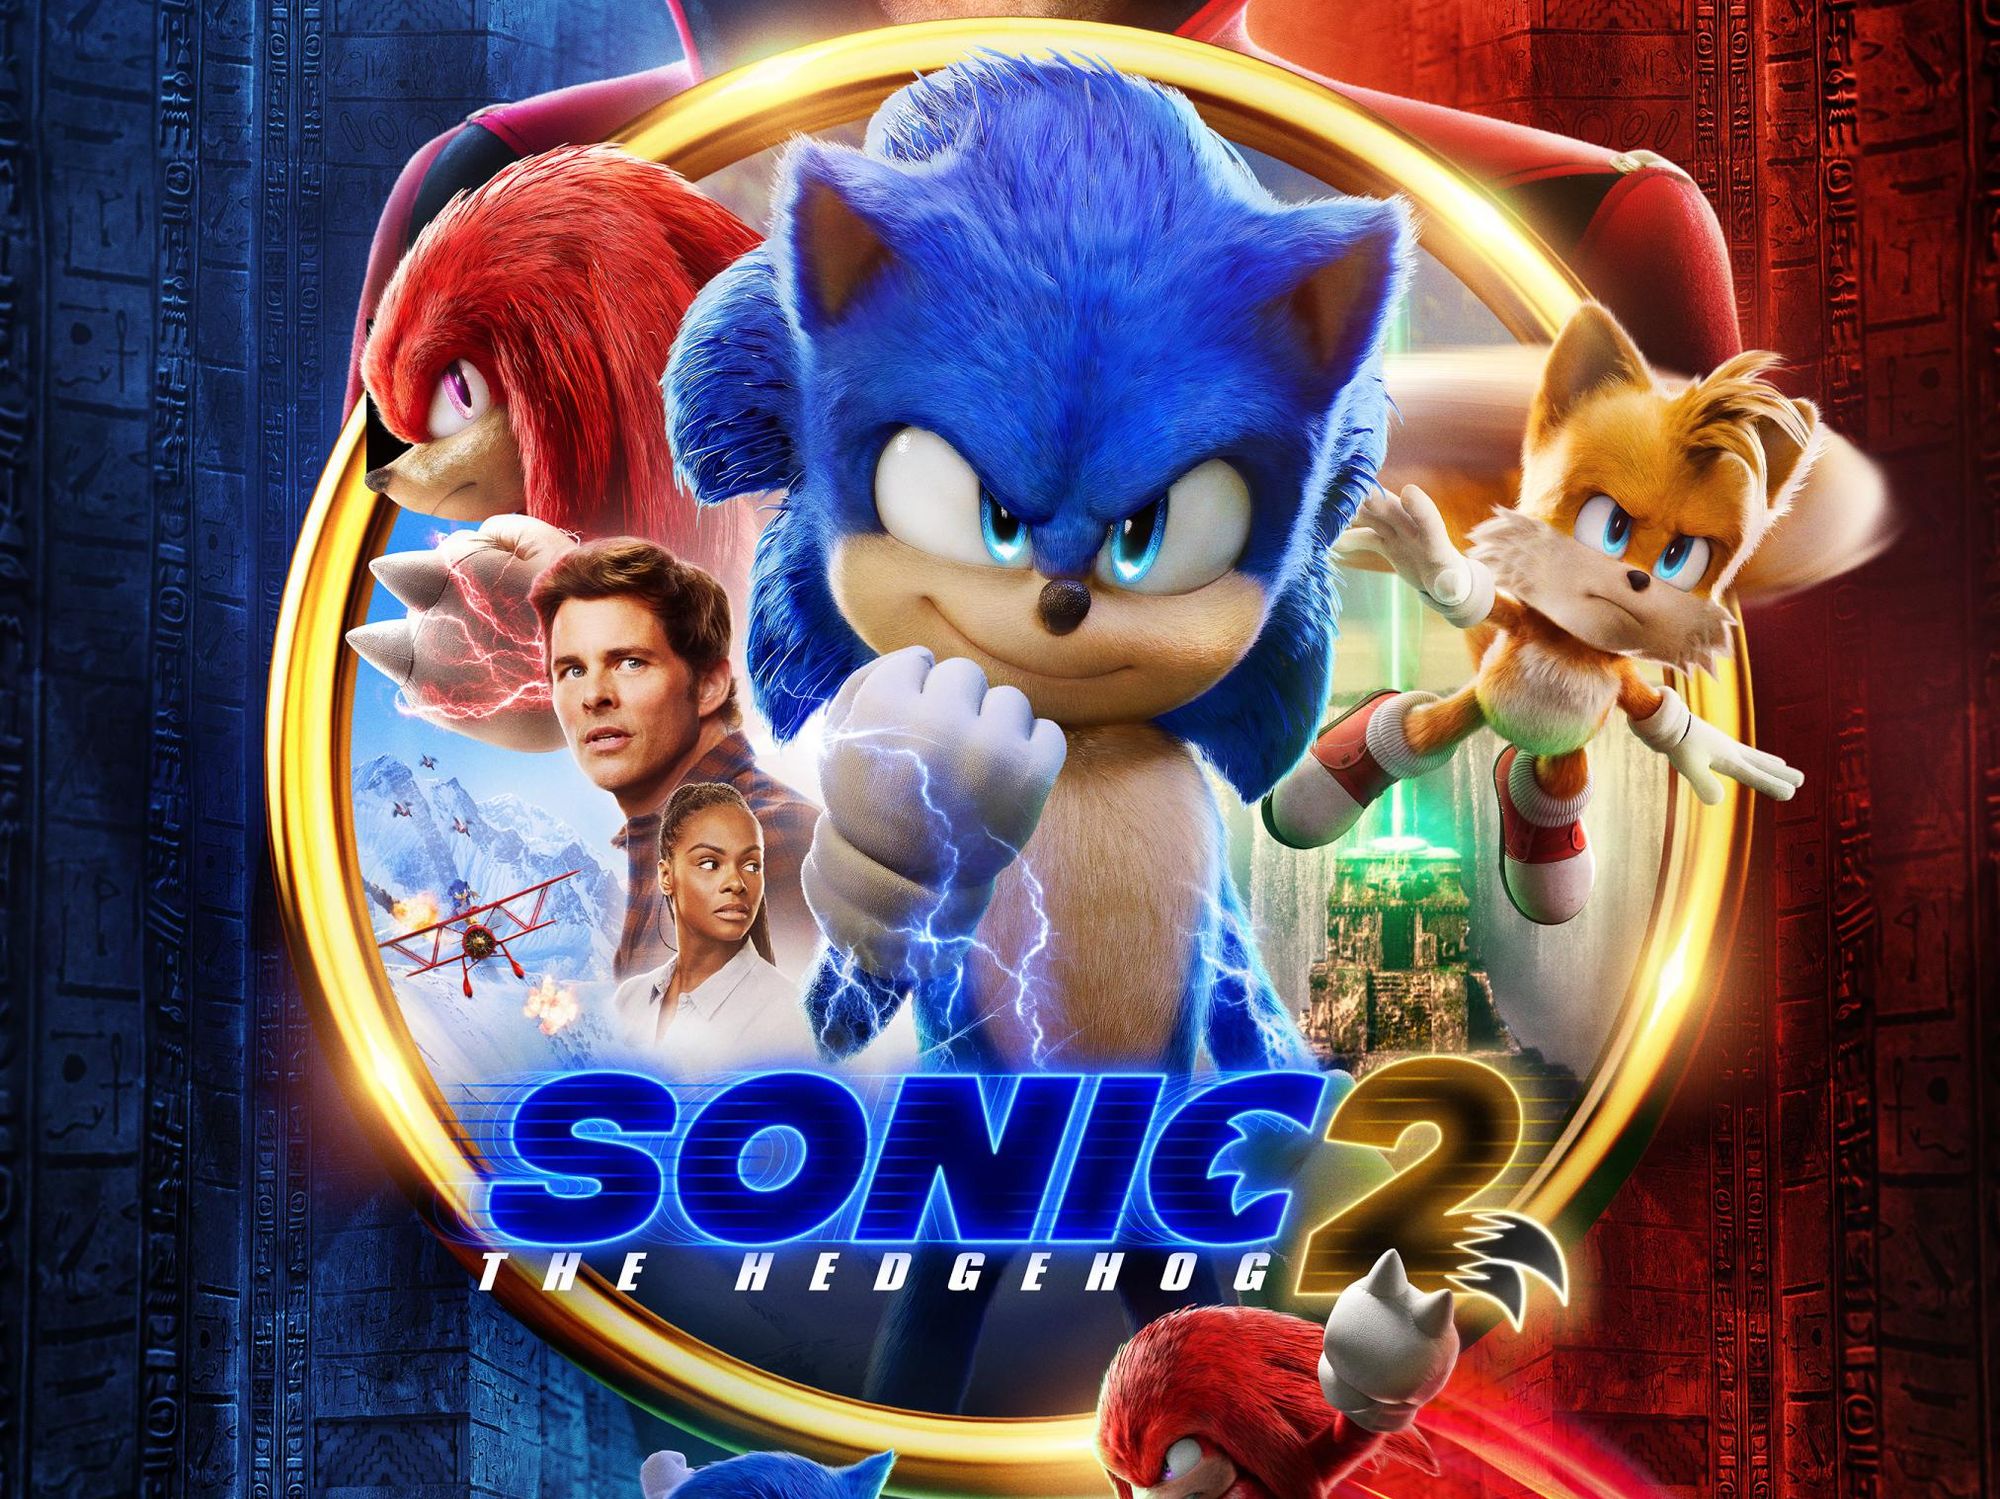 Movie poster for Sonic the Hedgehog 2 featuring the cast with Sonic in the center holding up his glowing right fist